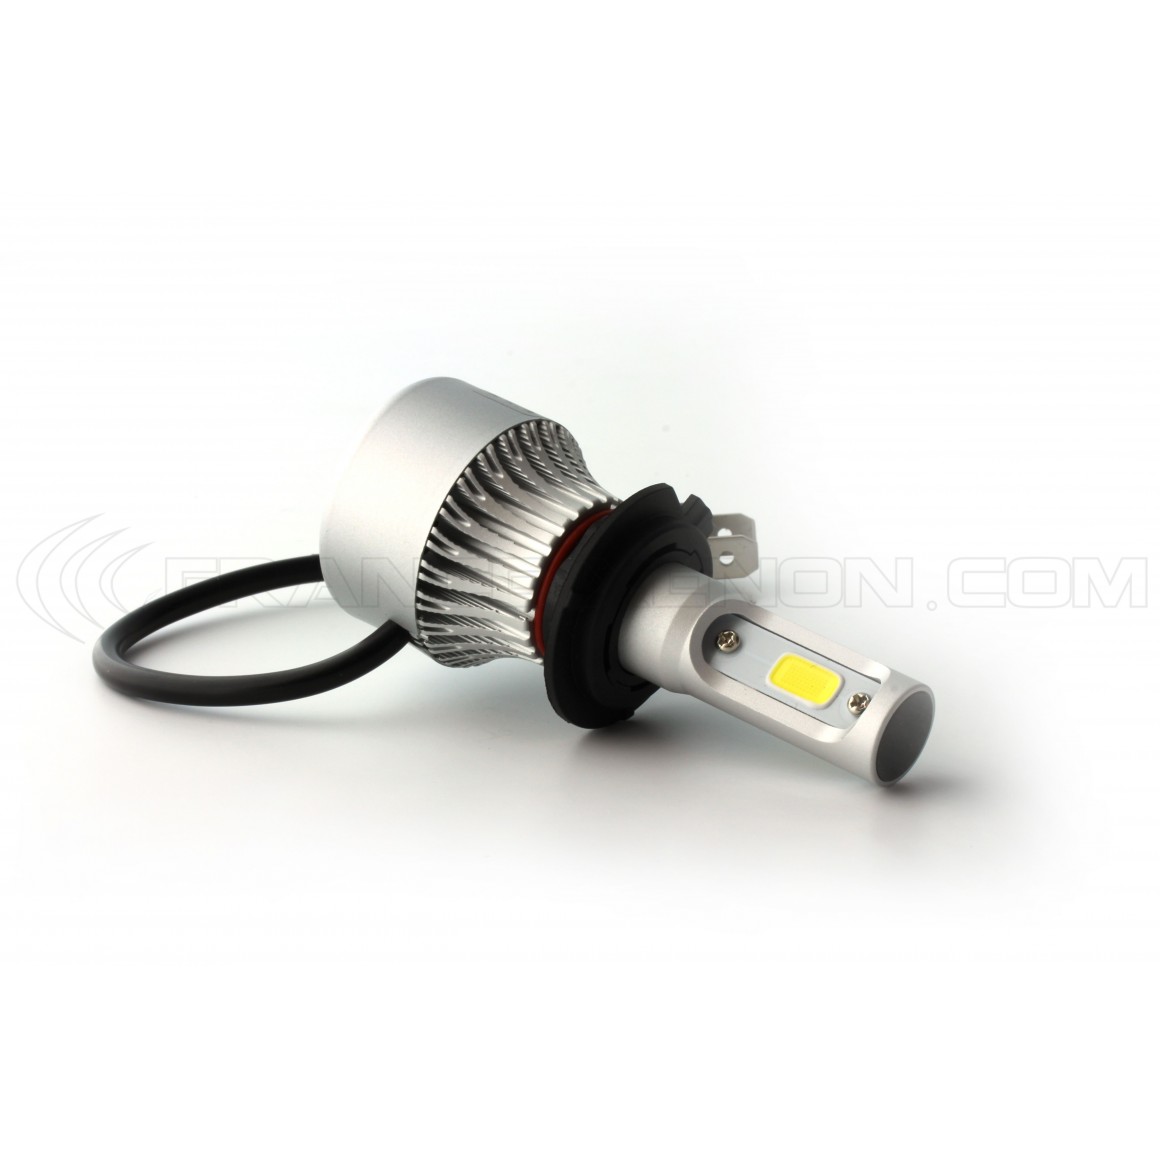 EMC Anti-jamming Headlamp All-in-One LED Conversion Kit Replace for HID or Halogen Bulbs with Canbus MALUOKASA XHP60 Chips 56W 6500K 12000LM H7 Car Headlight Bulbs 2 Pack H7 LED Headlight Bulbs 